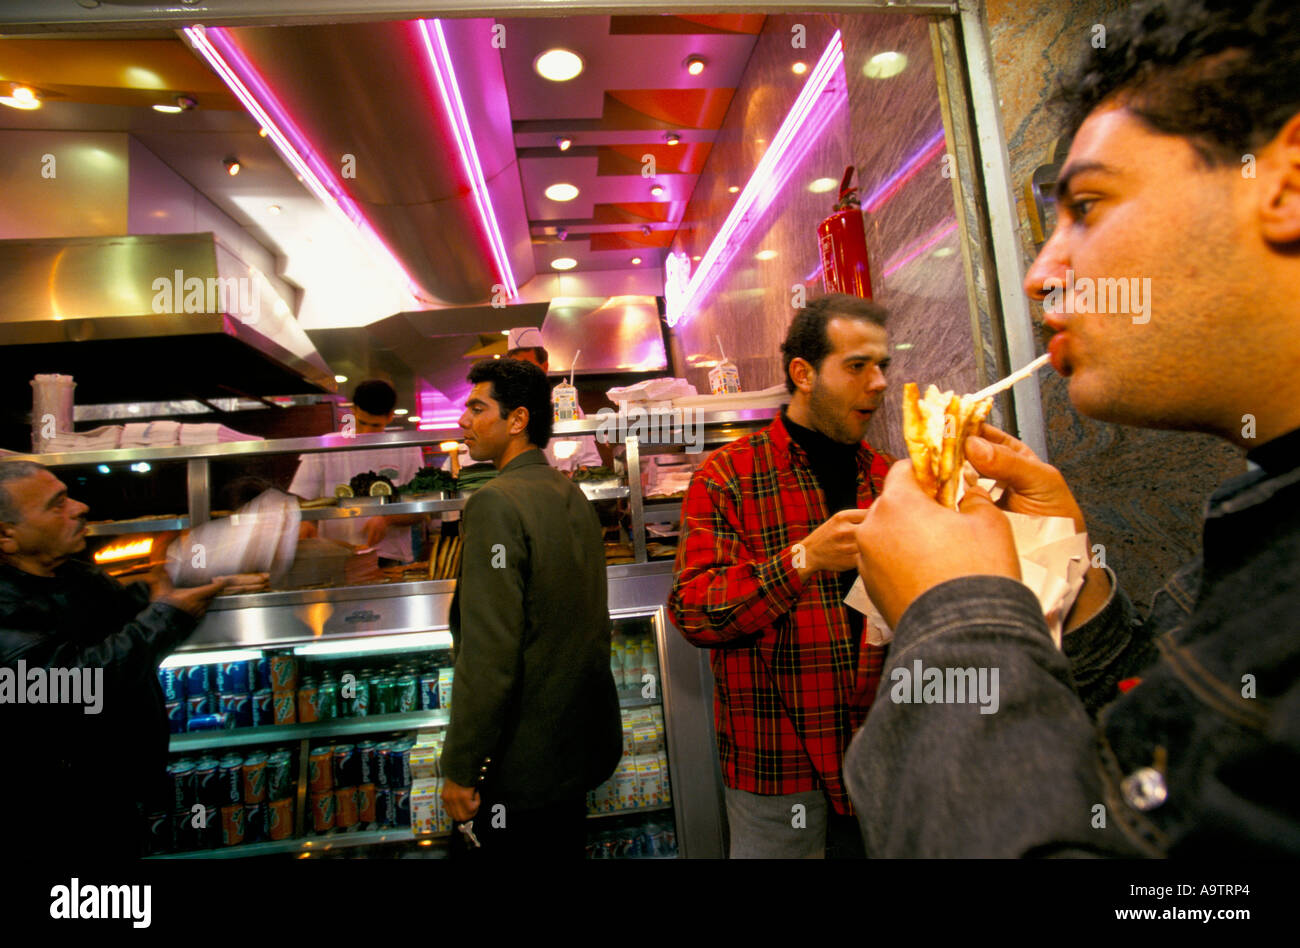 BARBAR RESTAURANT SELLING HOT SANDWICHES INTO THE EVENING HAMRA DISTRICT BEIRUT Stock Photo